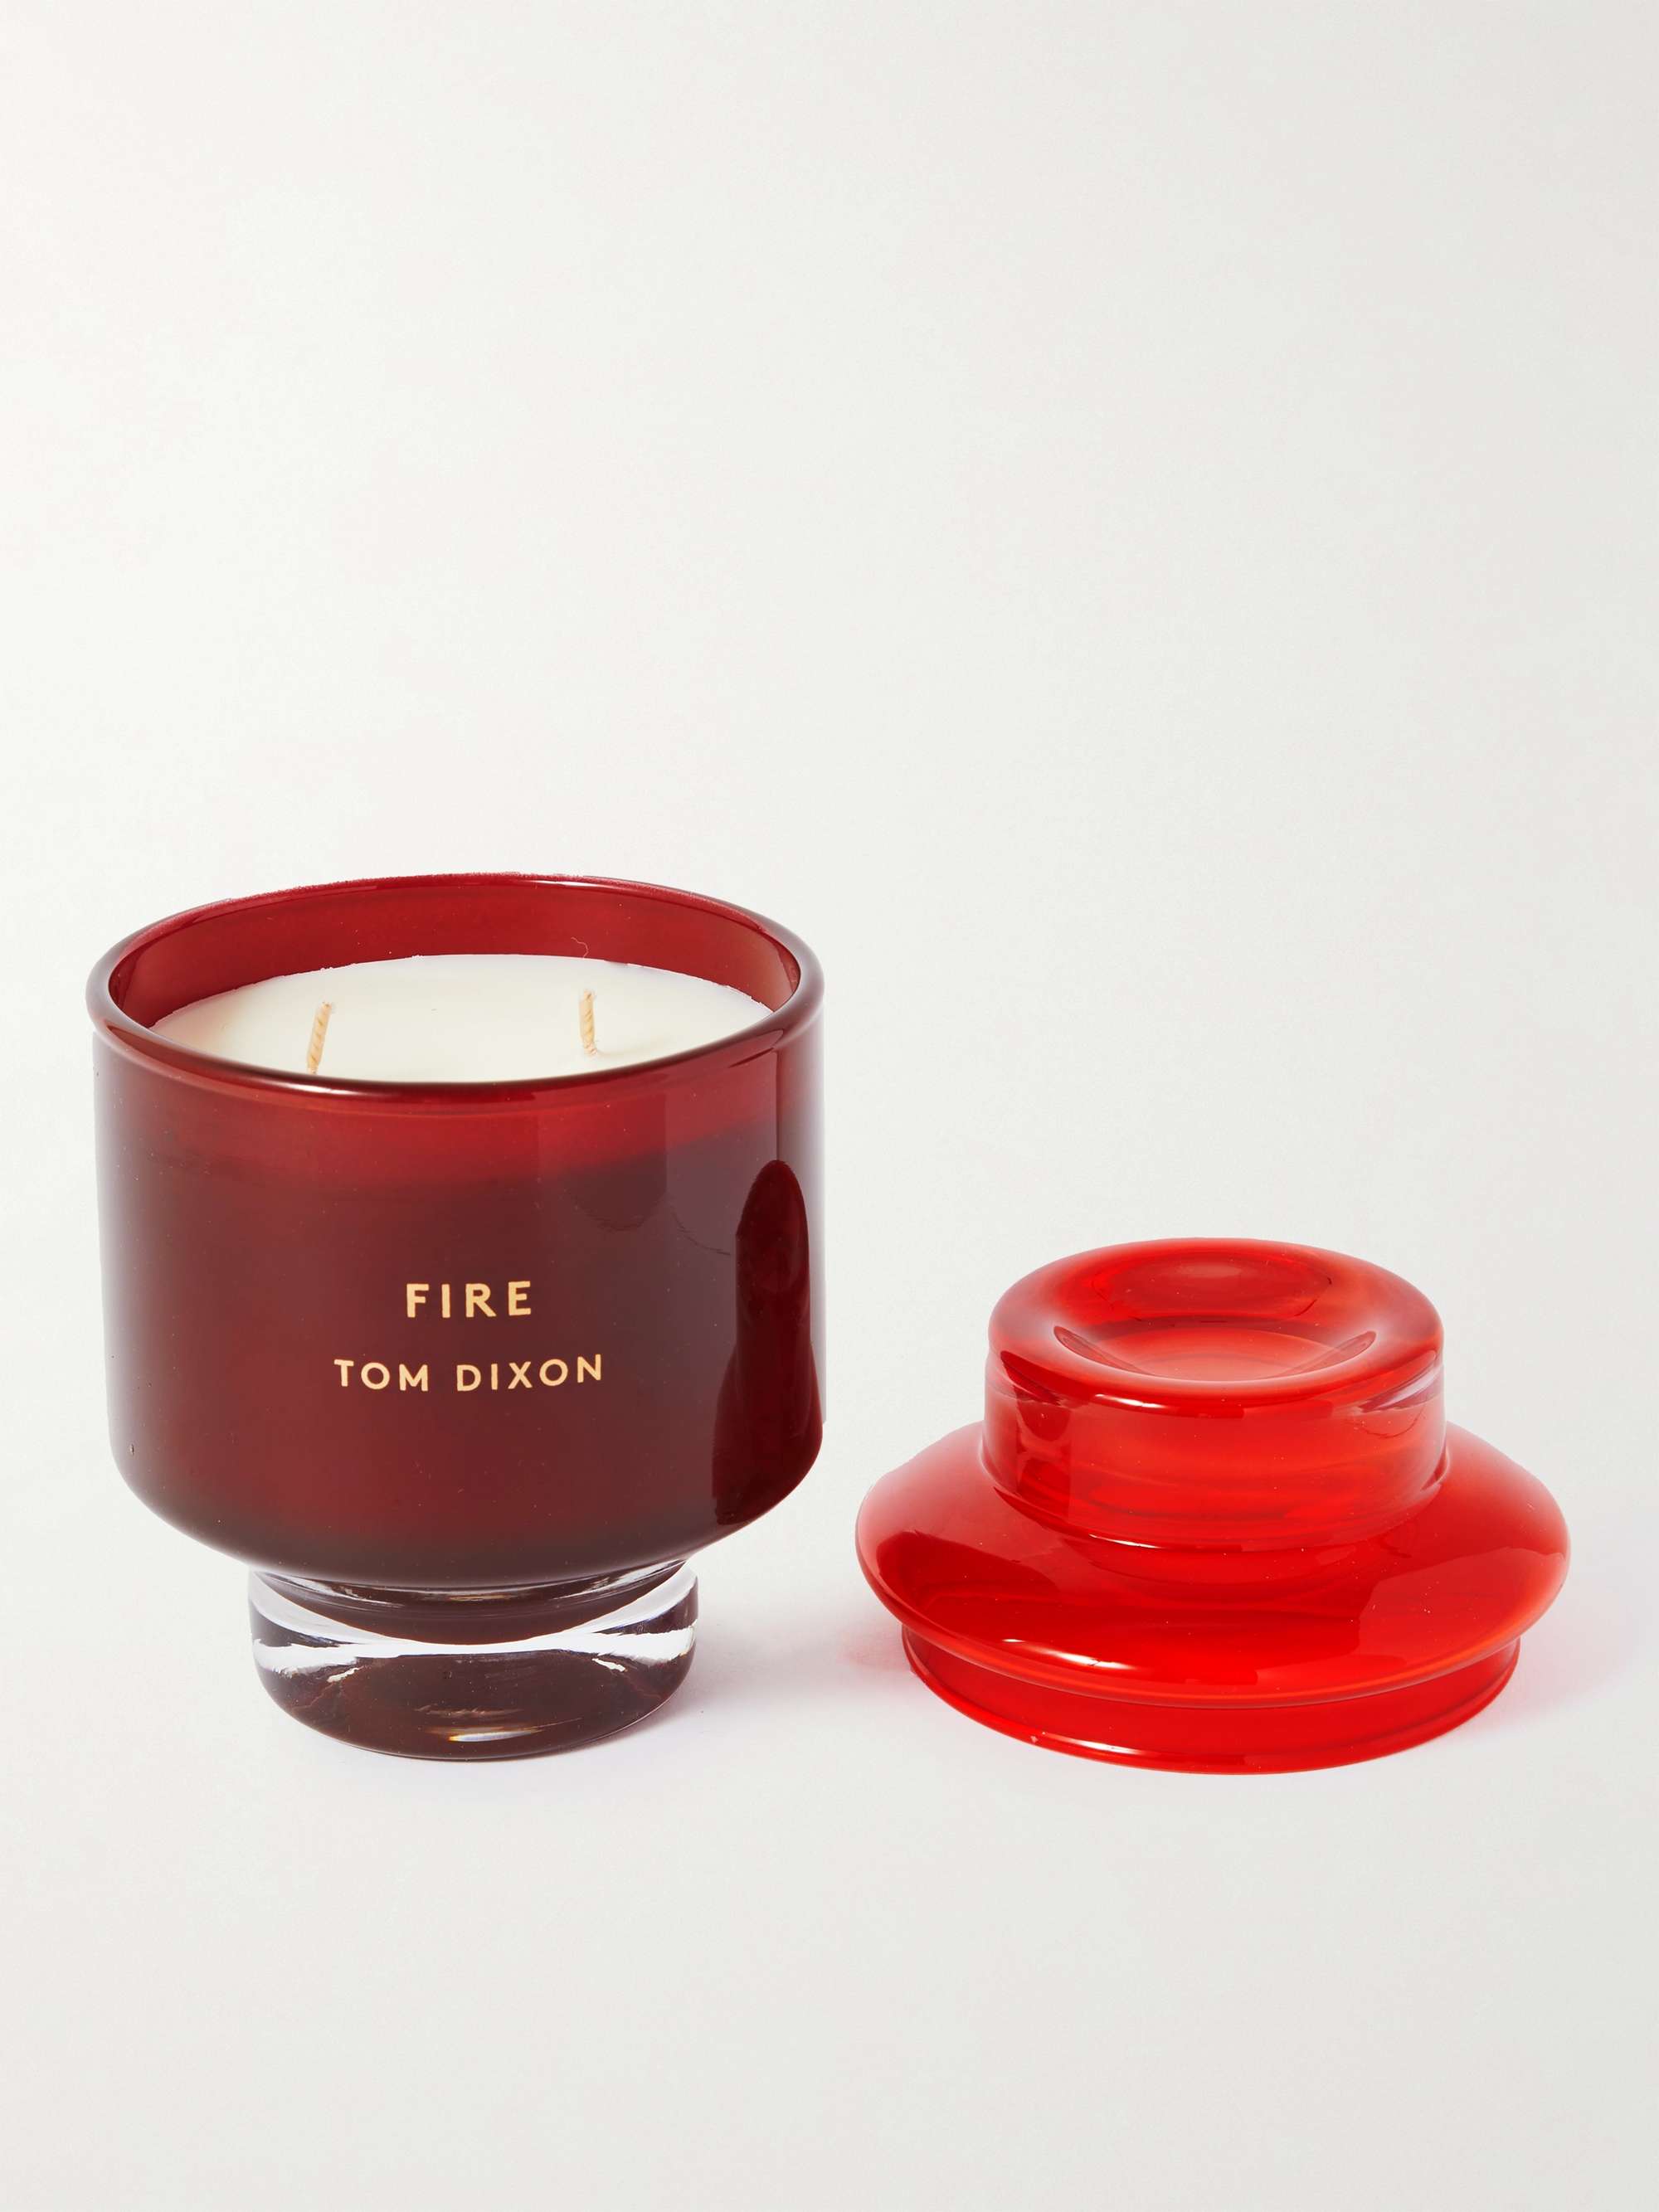 TOM DIXON Fire Scented Candle, 700g